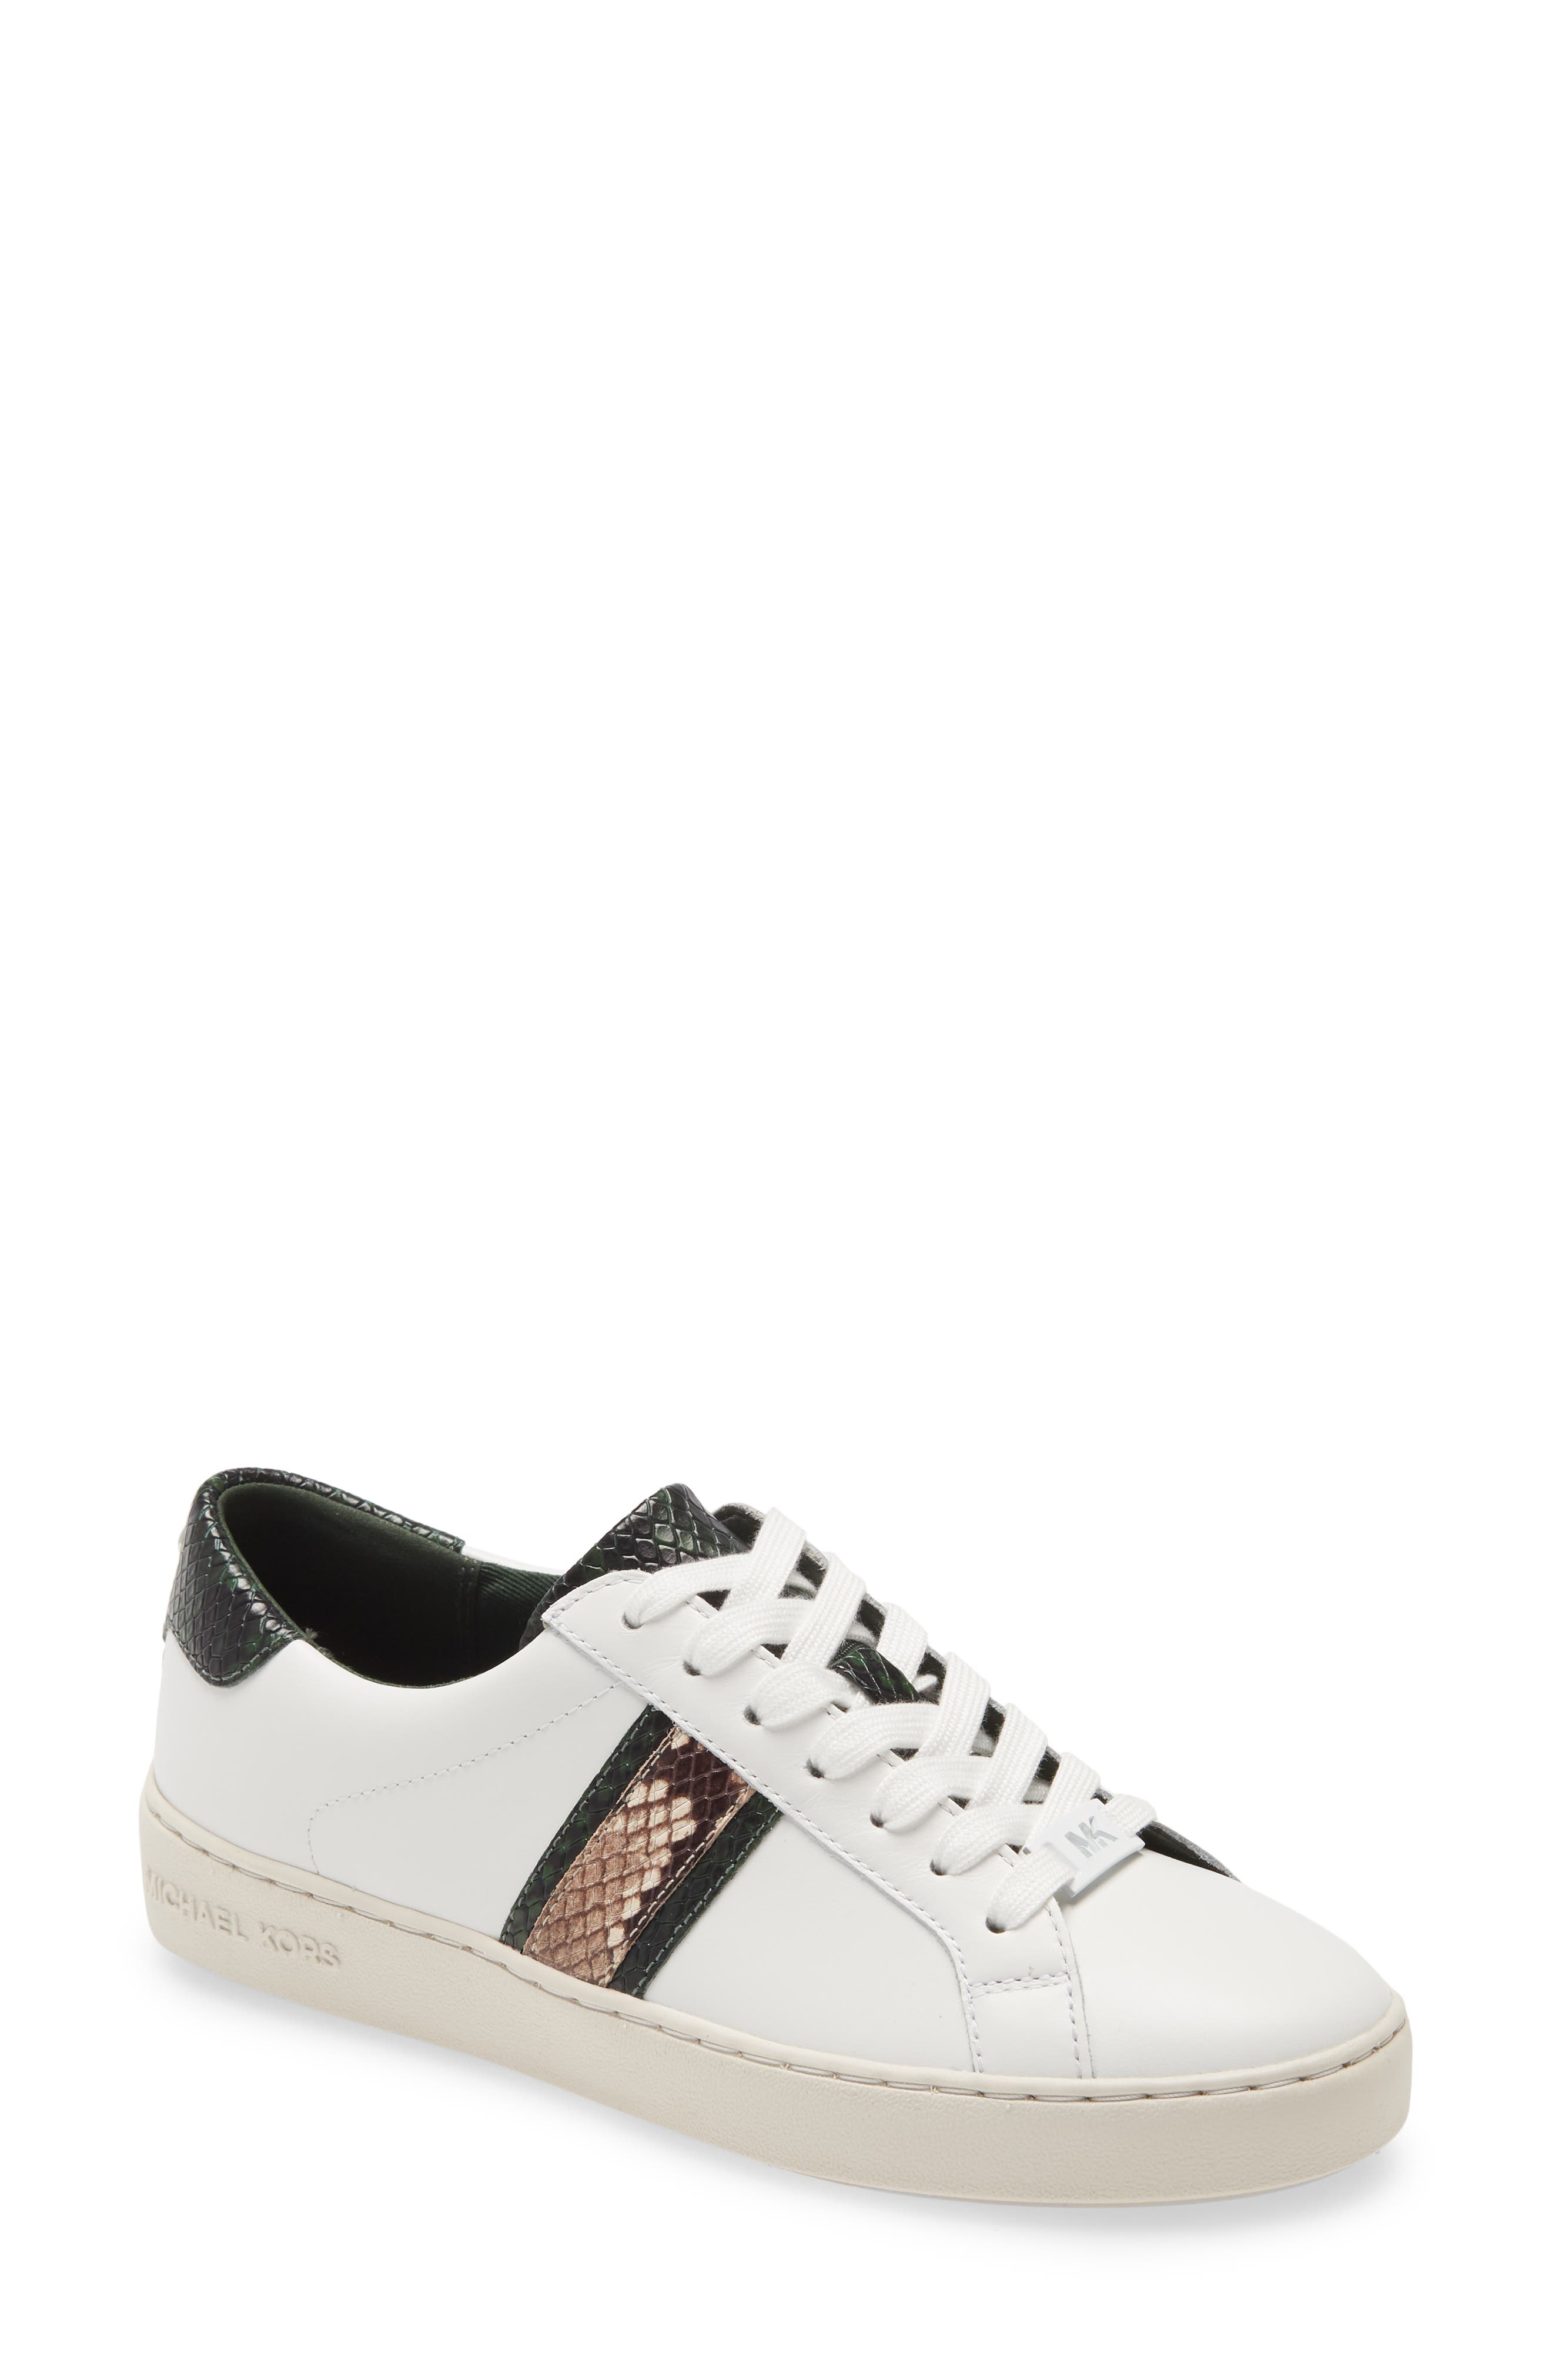 irving stripe lace up